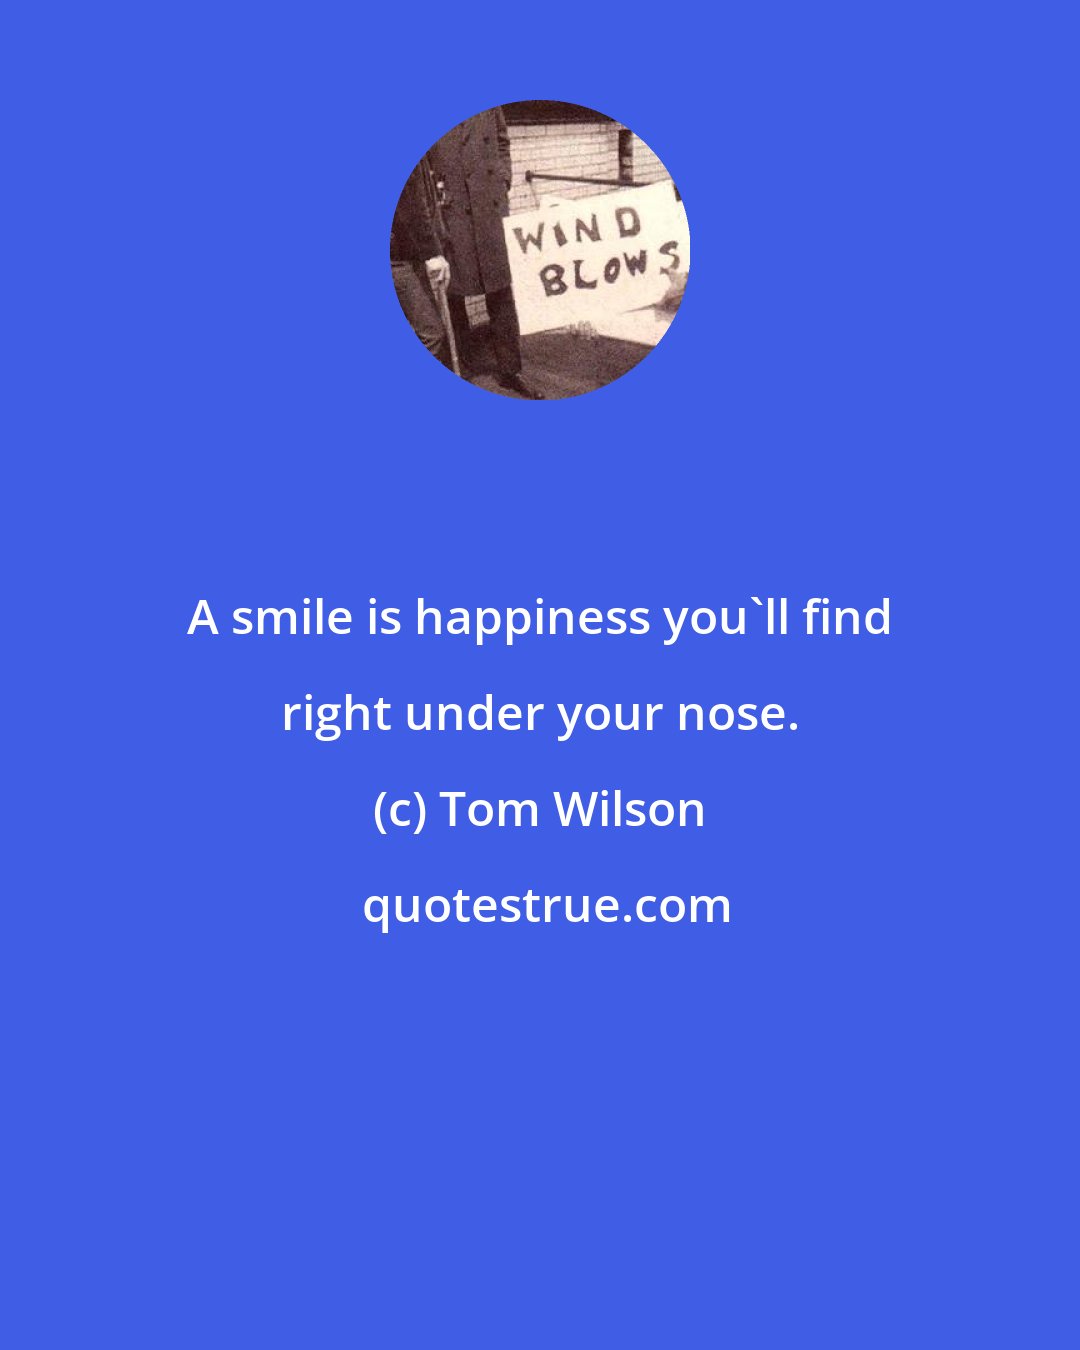 Tom Wilson: A smile is happiness you'll find right under your nose.